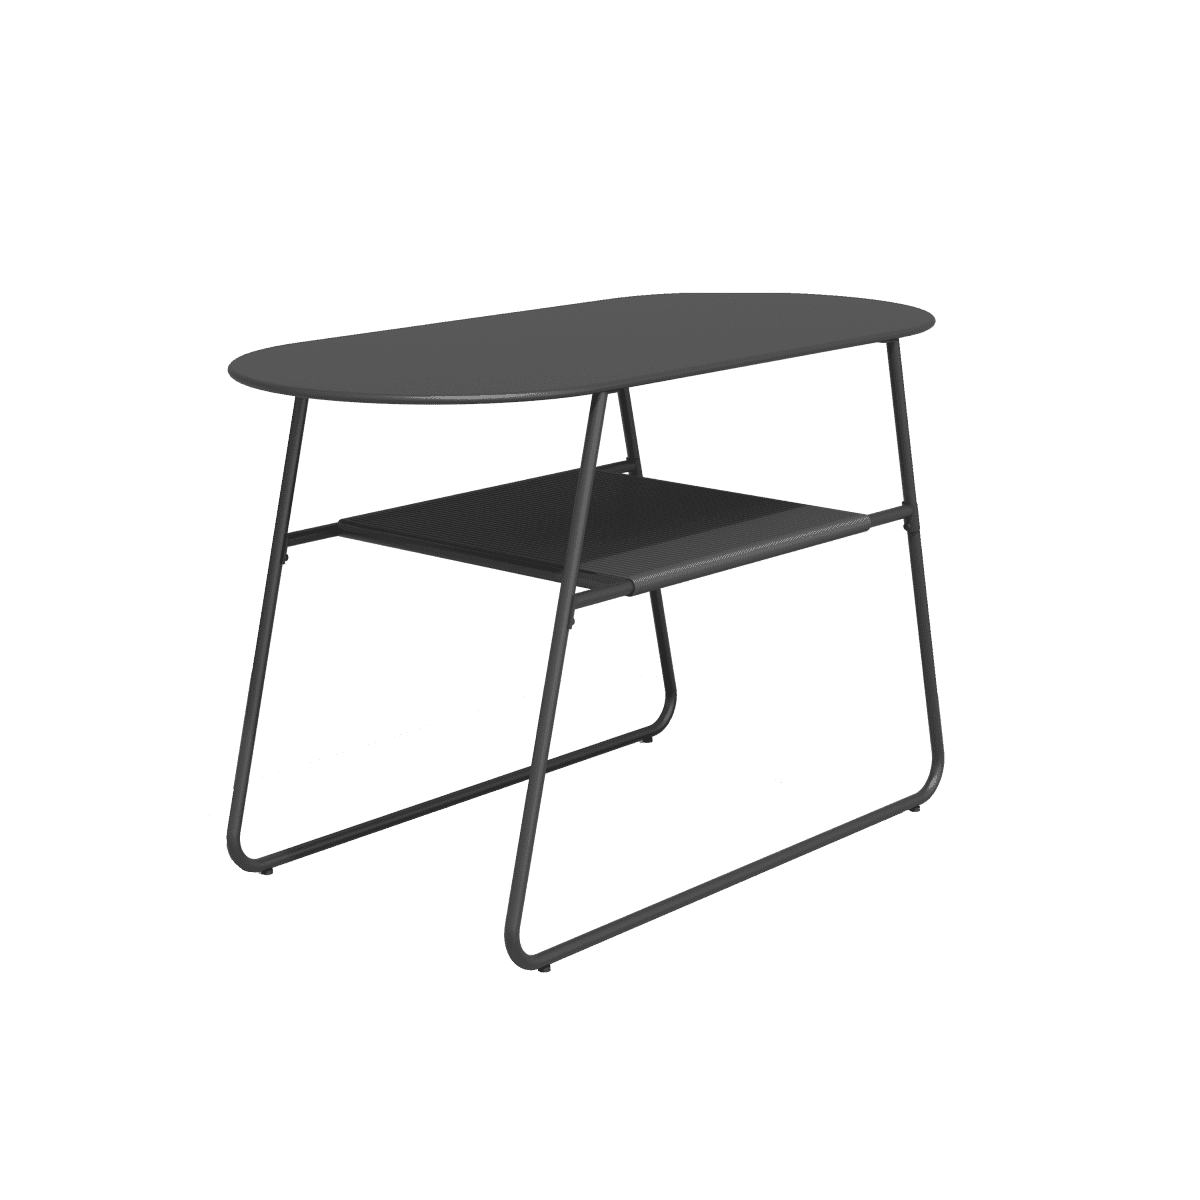 DUO TABLE NATERIAL steel and wicker 55X120X72H cm anthracite